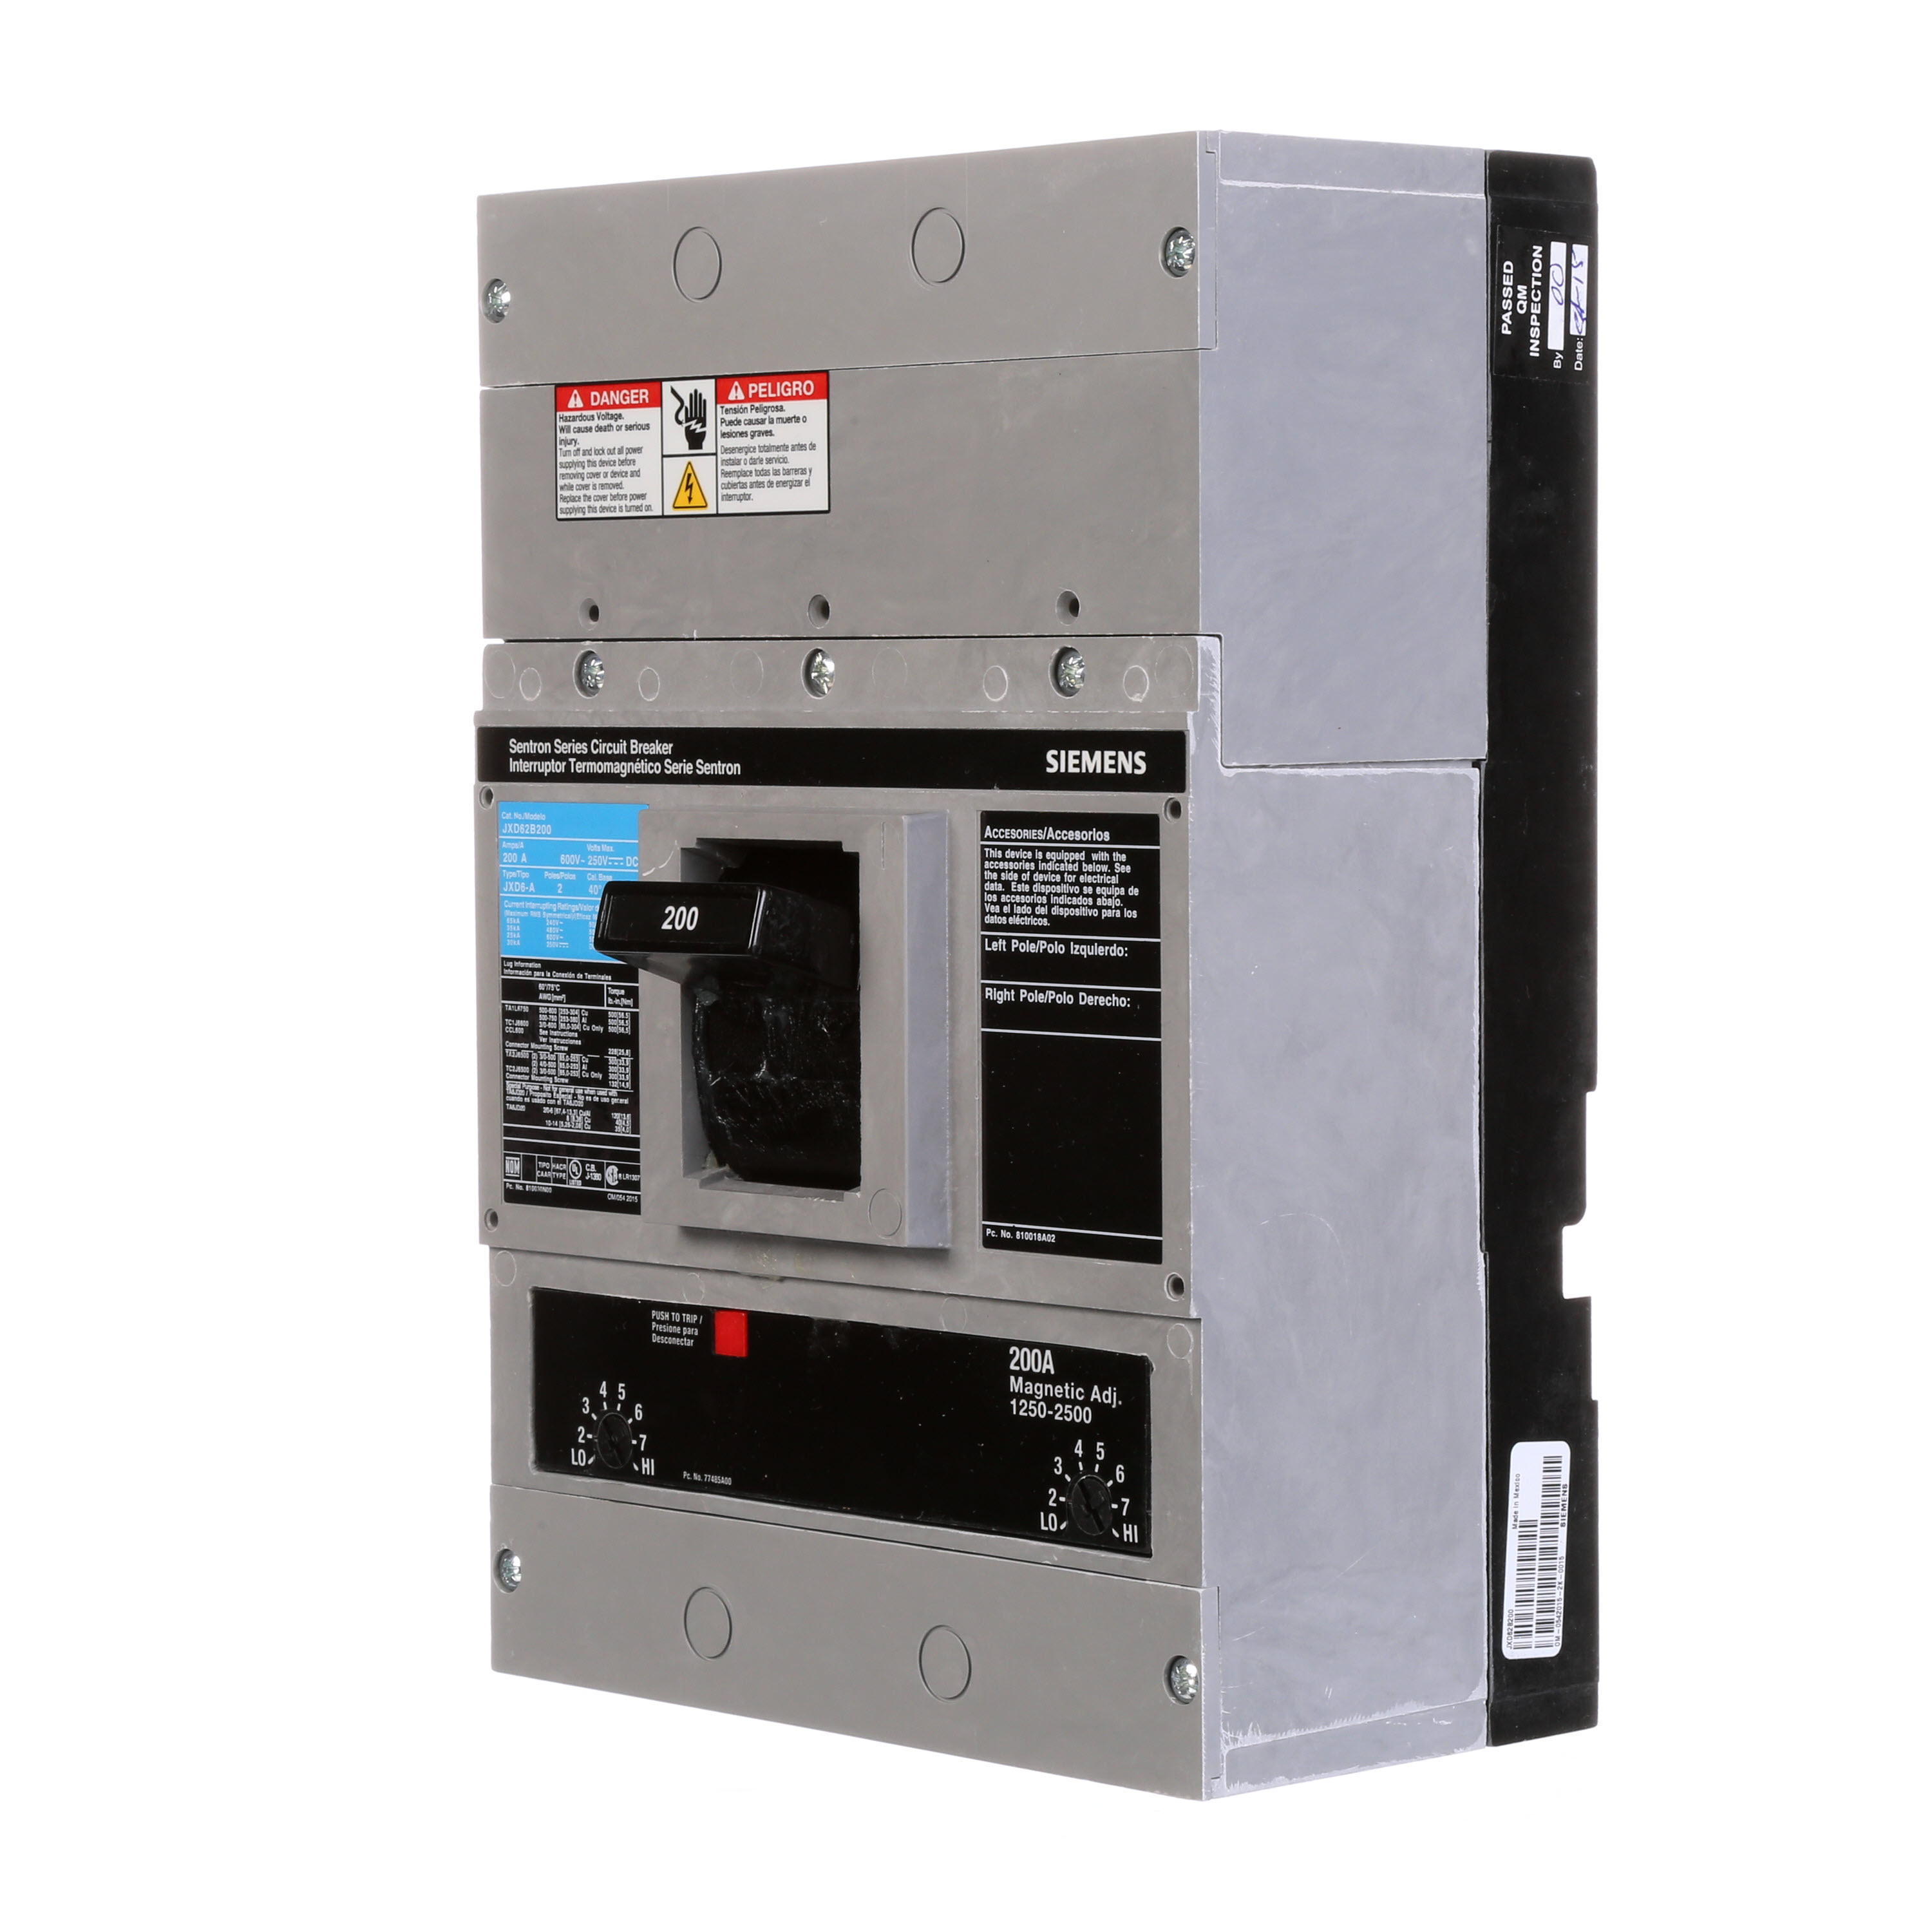 SIEMENS LOW VOLTAGE SENTRON MOLDED CASE CIRCUIT BREAKER WITH THERMAL - MAGNETICTRIP UNIT. ASSEMBLED STANDARD 40 DEG C BREAKER JD FRAME WITH STANDARD BREAKING CAPACITY. 200A 2-POLE (25KAIC AT 600V) (35KAIC AT 480V). NON-INTERCHANGEABLE TRIP UNIT. SPECIAL FEATURES NO LUGS INSTALLED. DIMENSIONS (W x H x D) IN 7.50 x 11.0 x 4.00.